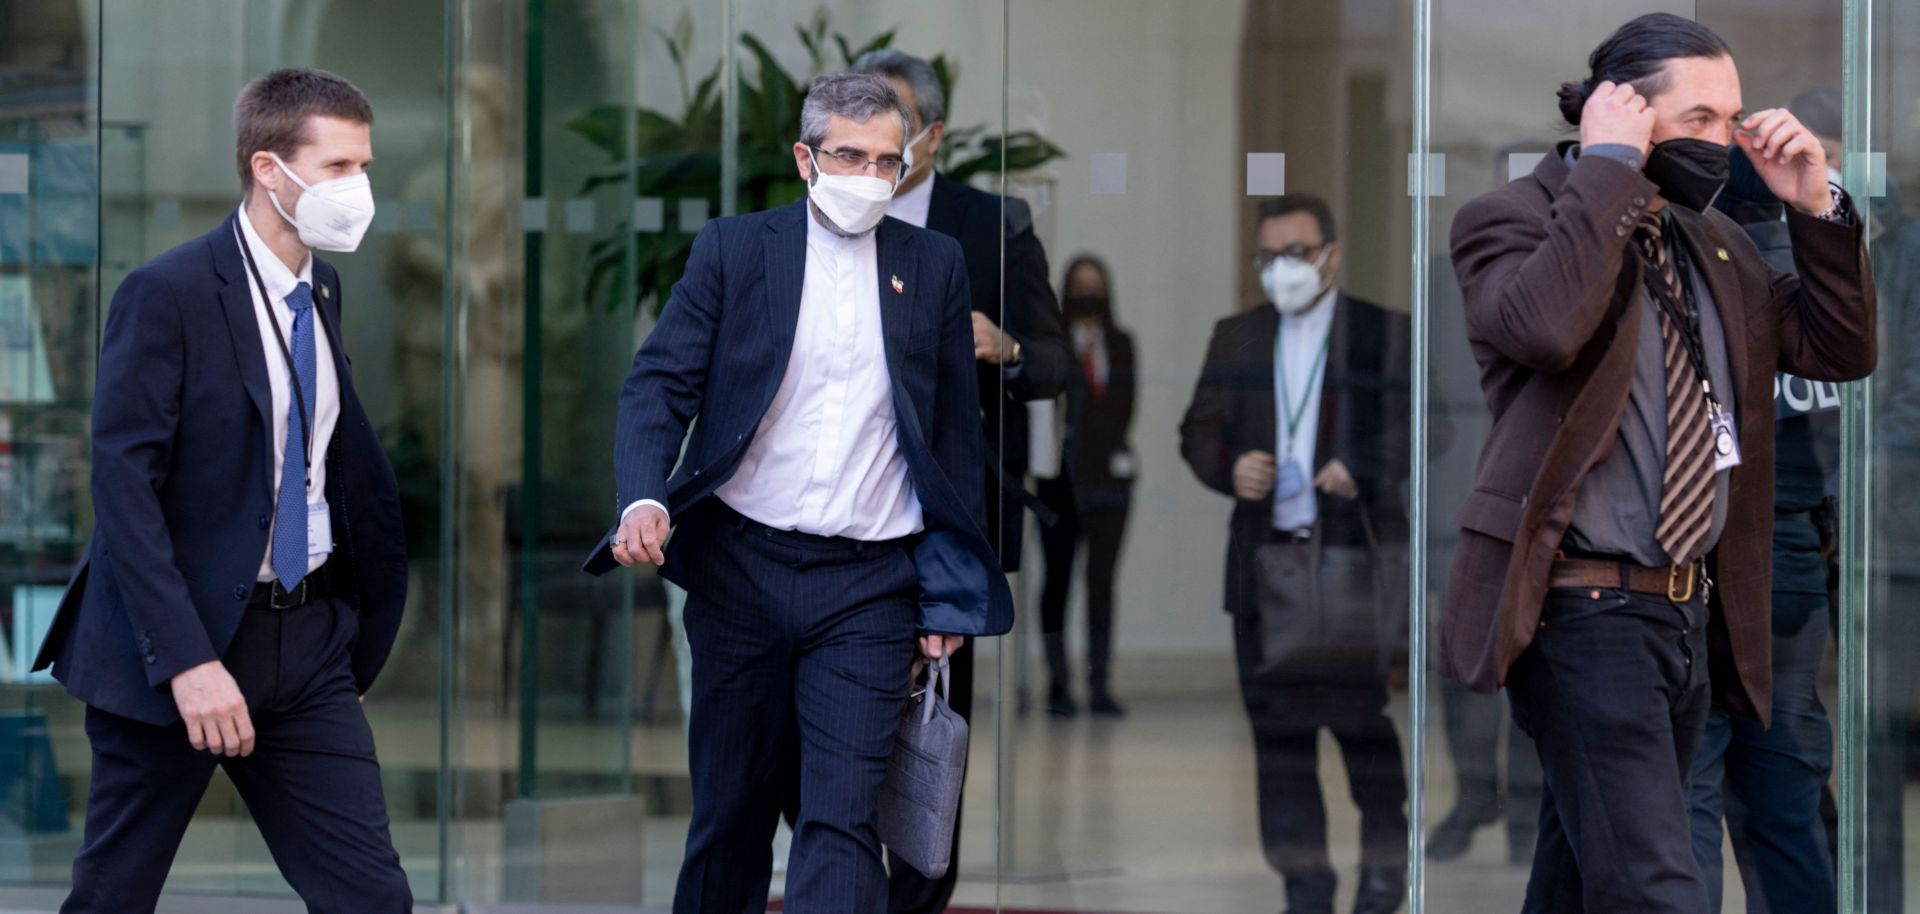 Iran's chief nuclear negotiator Ali Bagheri Kani (center) is seen leaving the venue in Vienna, Austria, where Joint Comprehensive Plan of Action (JCPOA) talks have been held on March 11, 2022. 